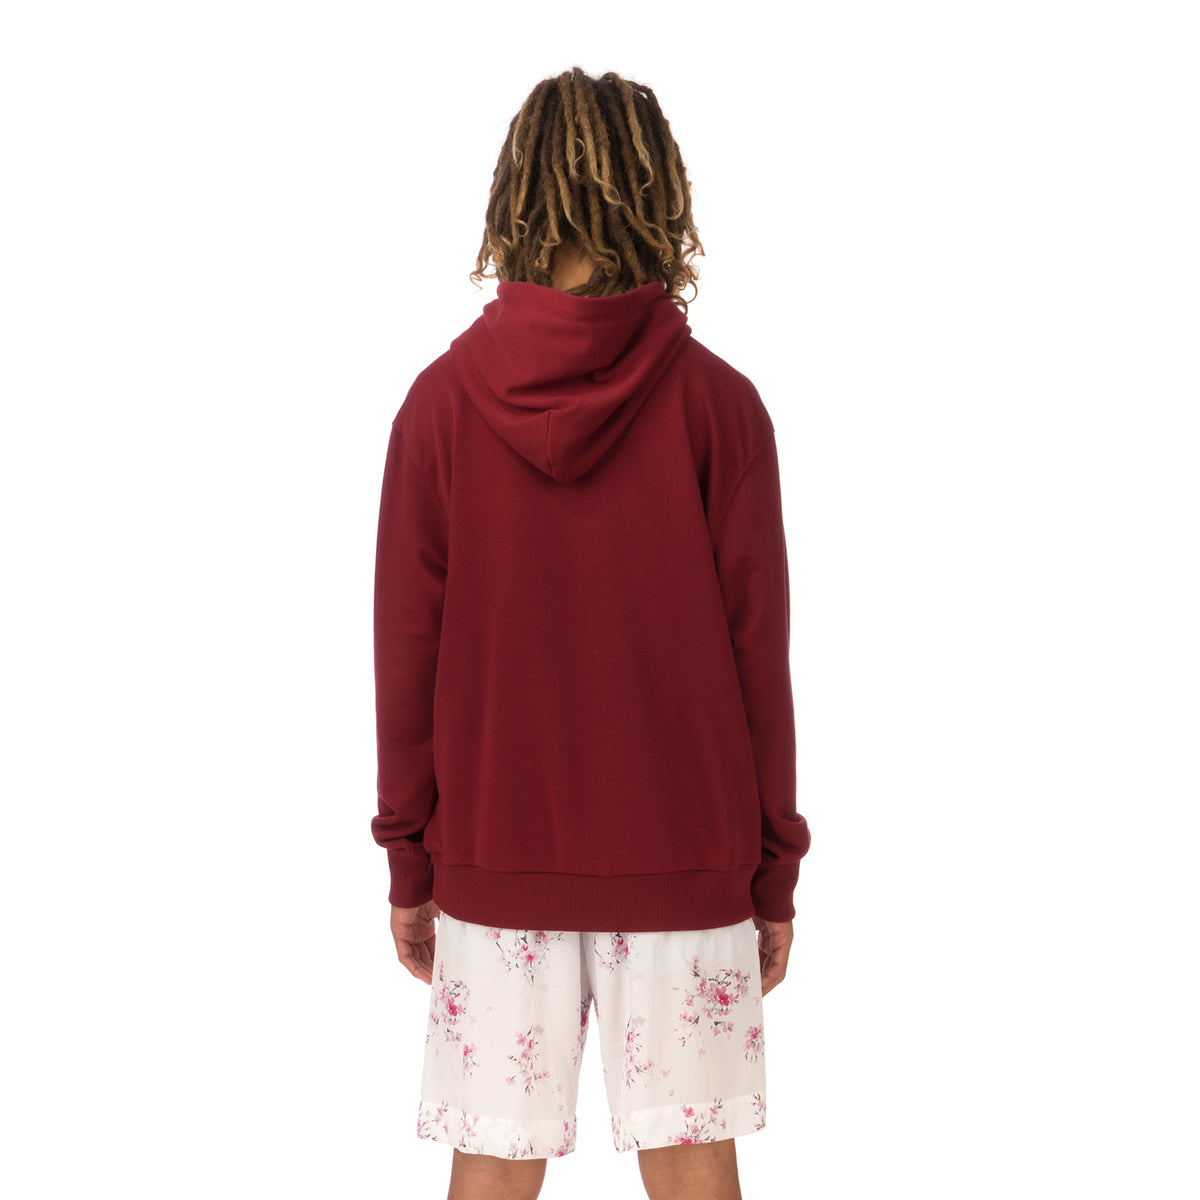 IH NOM UH NIT | Embroidered Koi Fish Hoodie Deep Red - Concrete